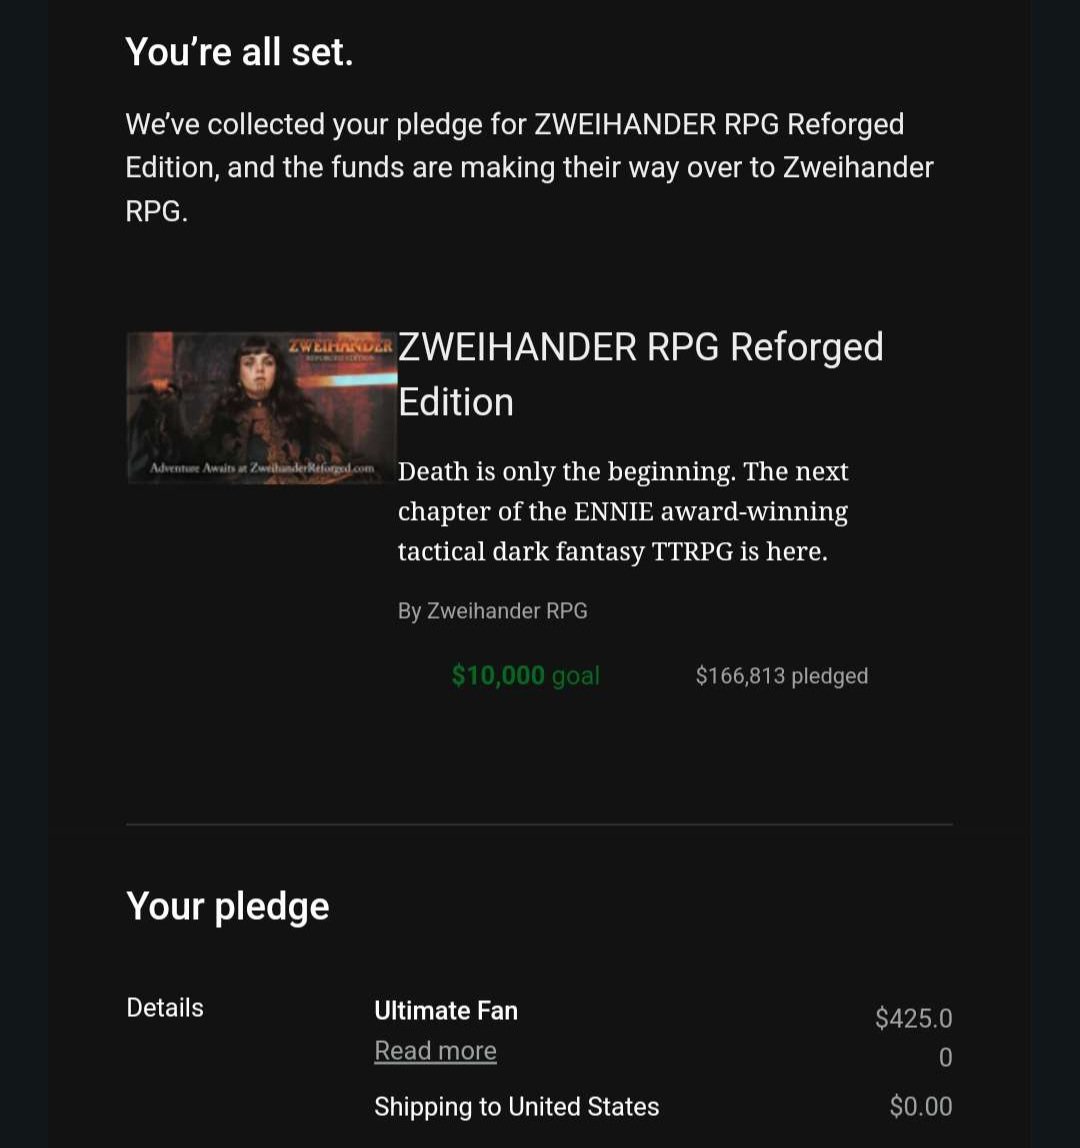 Welp, it's official. Thanks to my amazing community, we were able to pledge the highest teir for the new @ZweihanderRPG kickstarter! Thank you so much to everyone who came and supported my silly wants, I can't wait to stream this campaign! #ttrpg #twitchstreamer #gamemaster